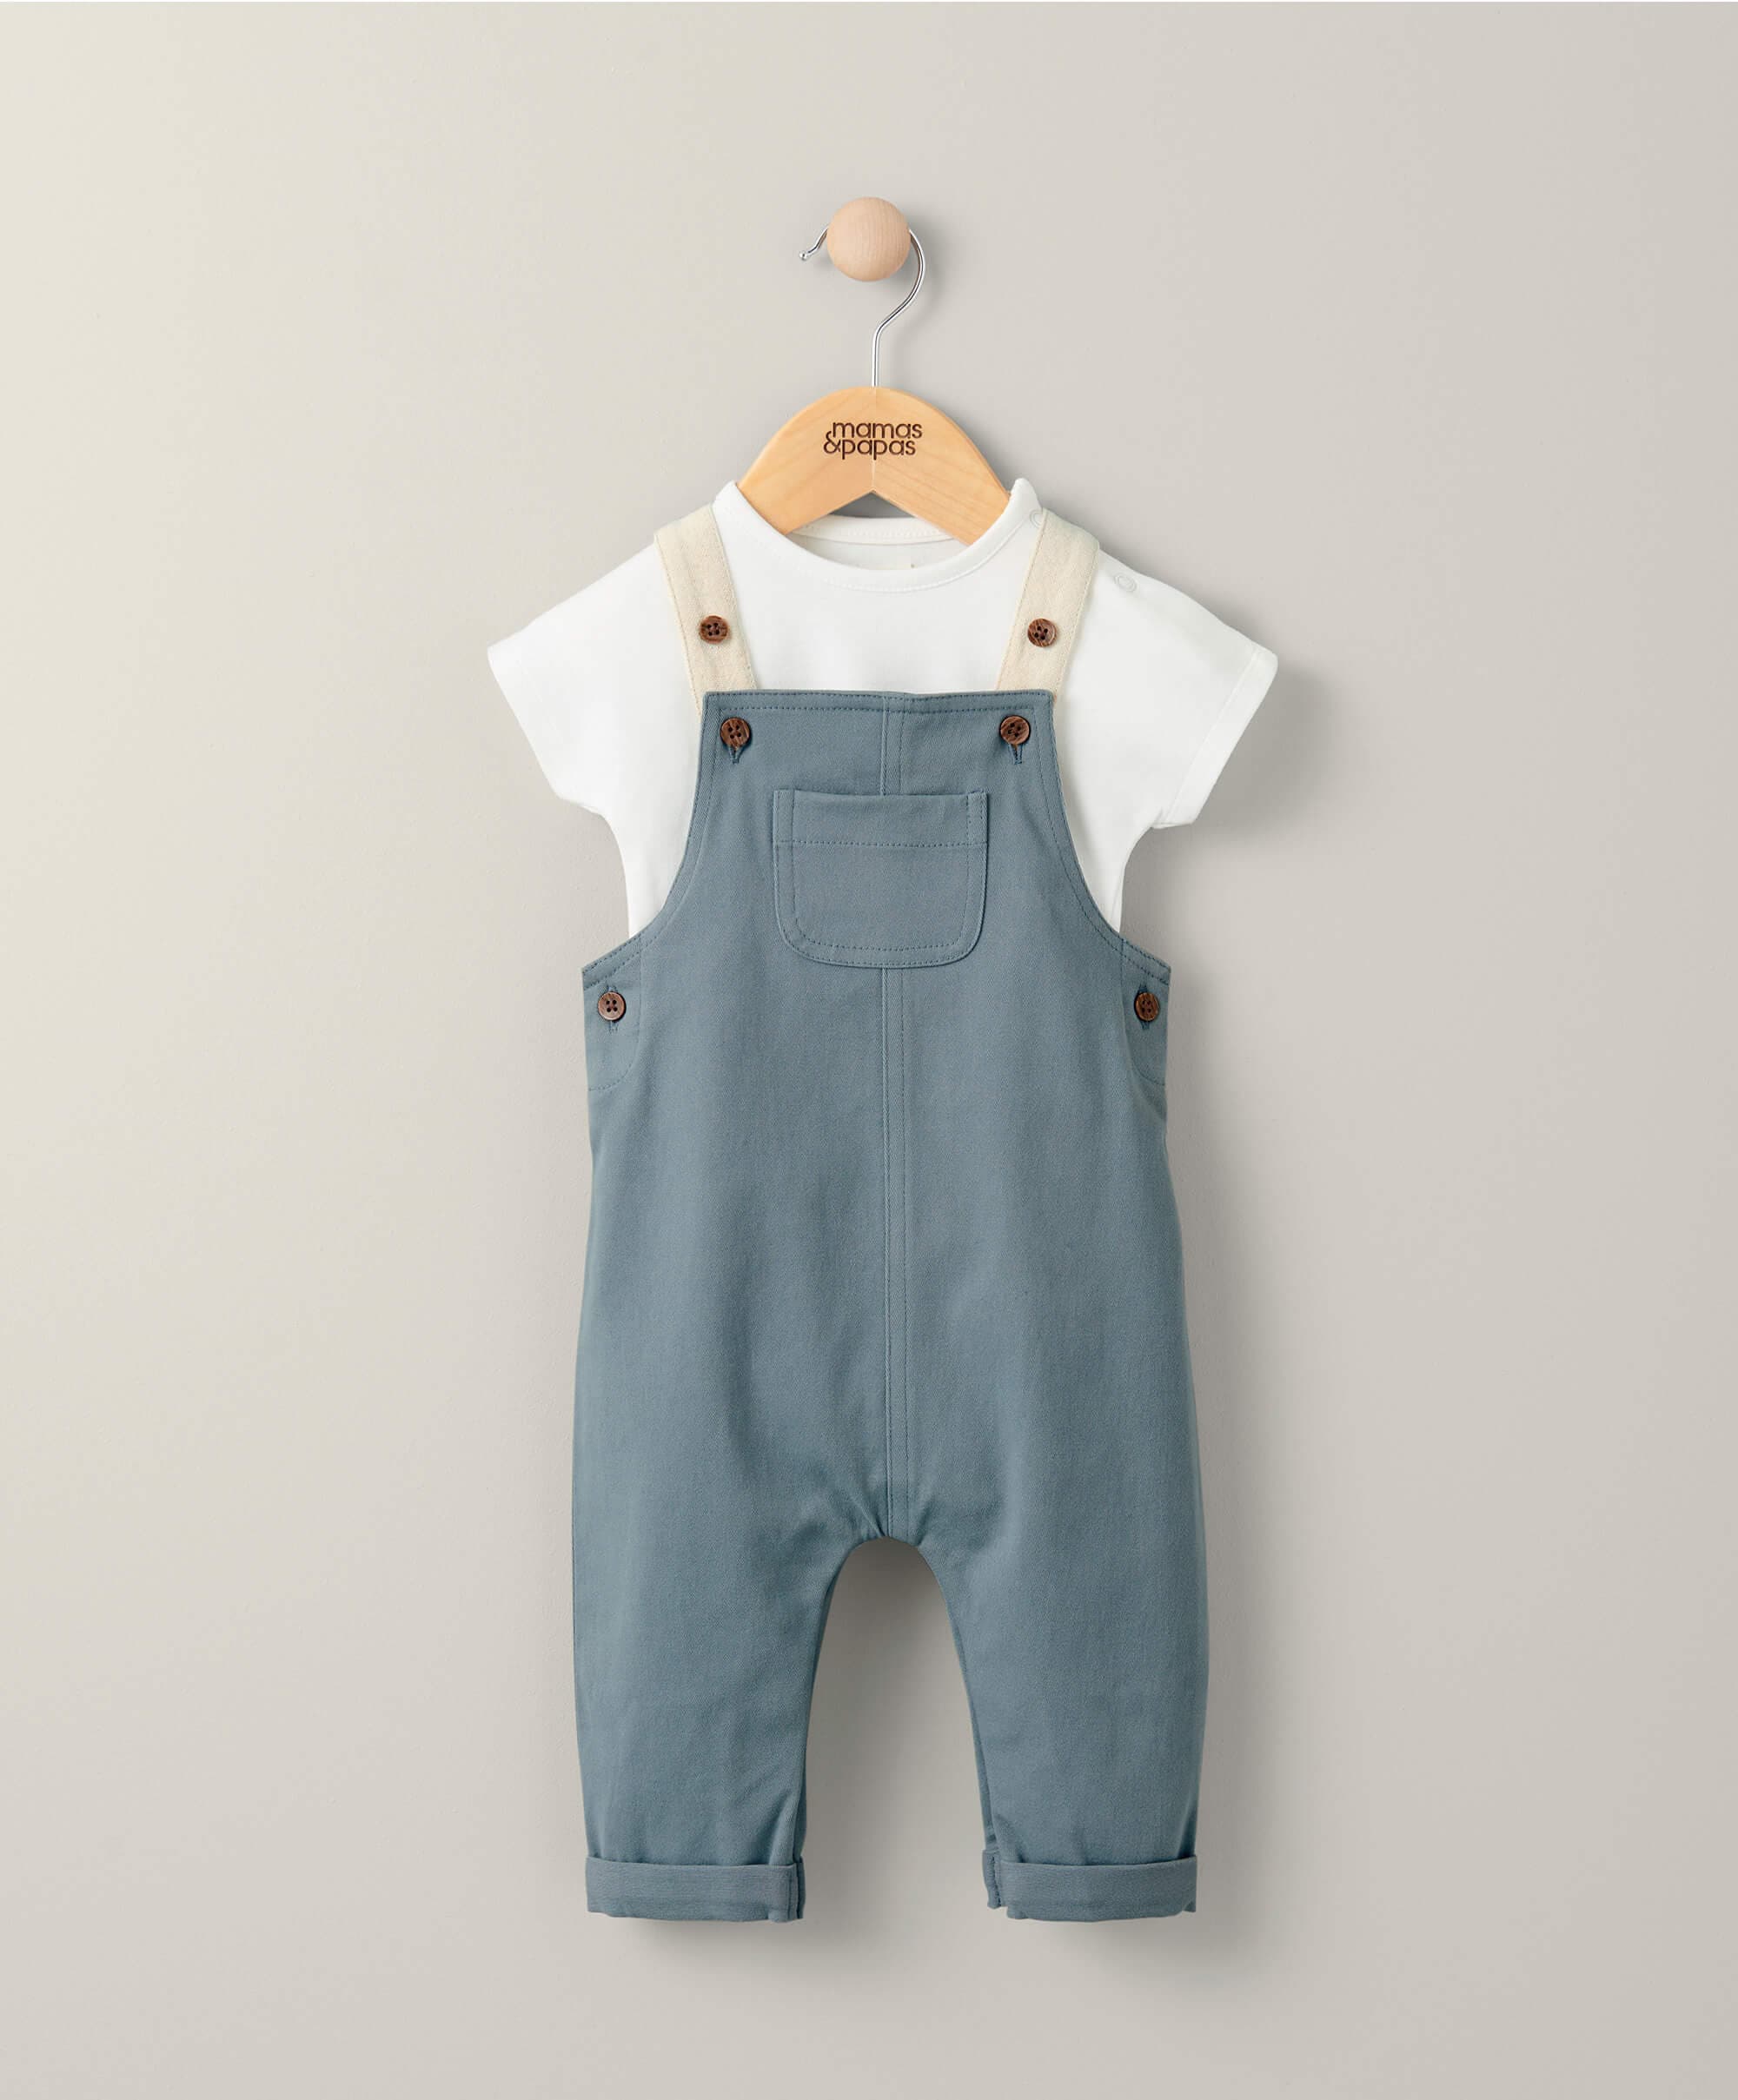 Kids Summer Clothes Set Dungarees Vest Tops White Overalls Denim Sleeveless  Outfits 